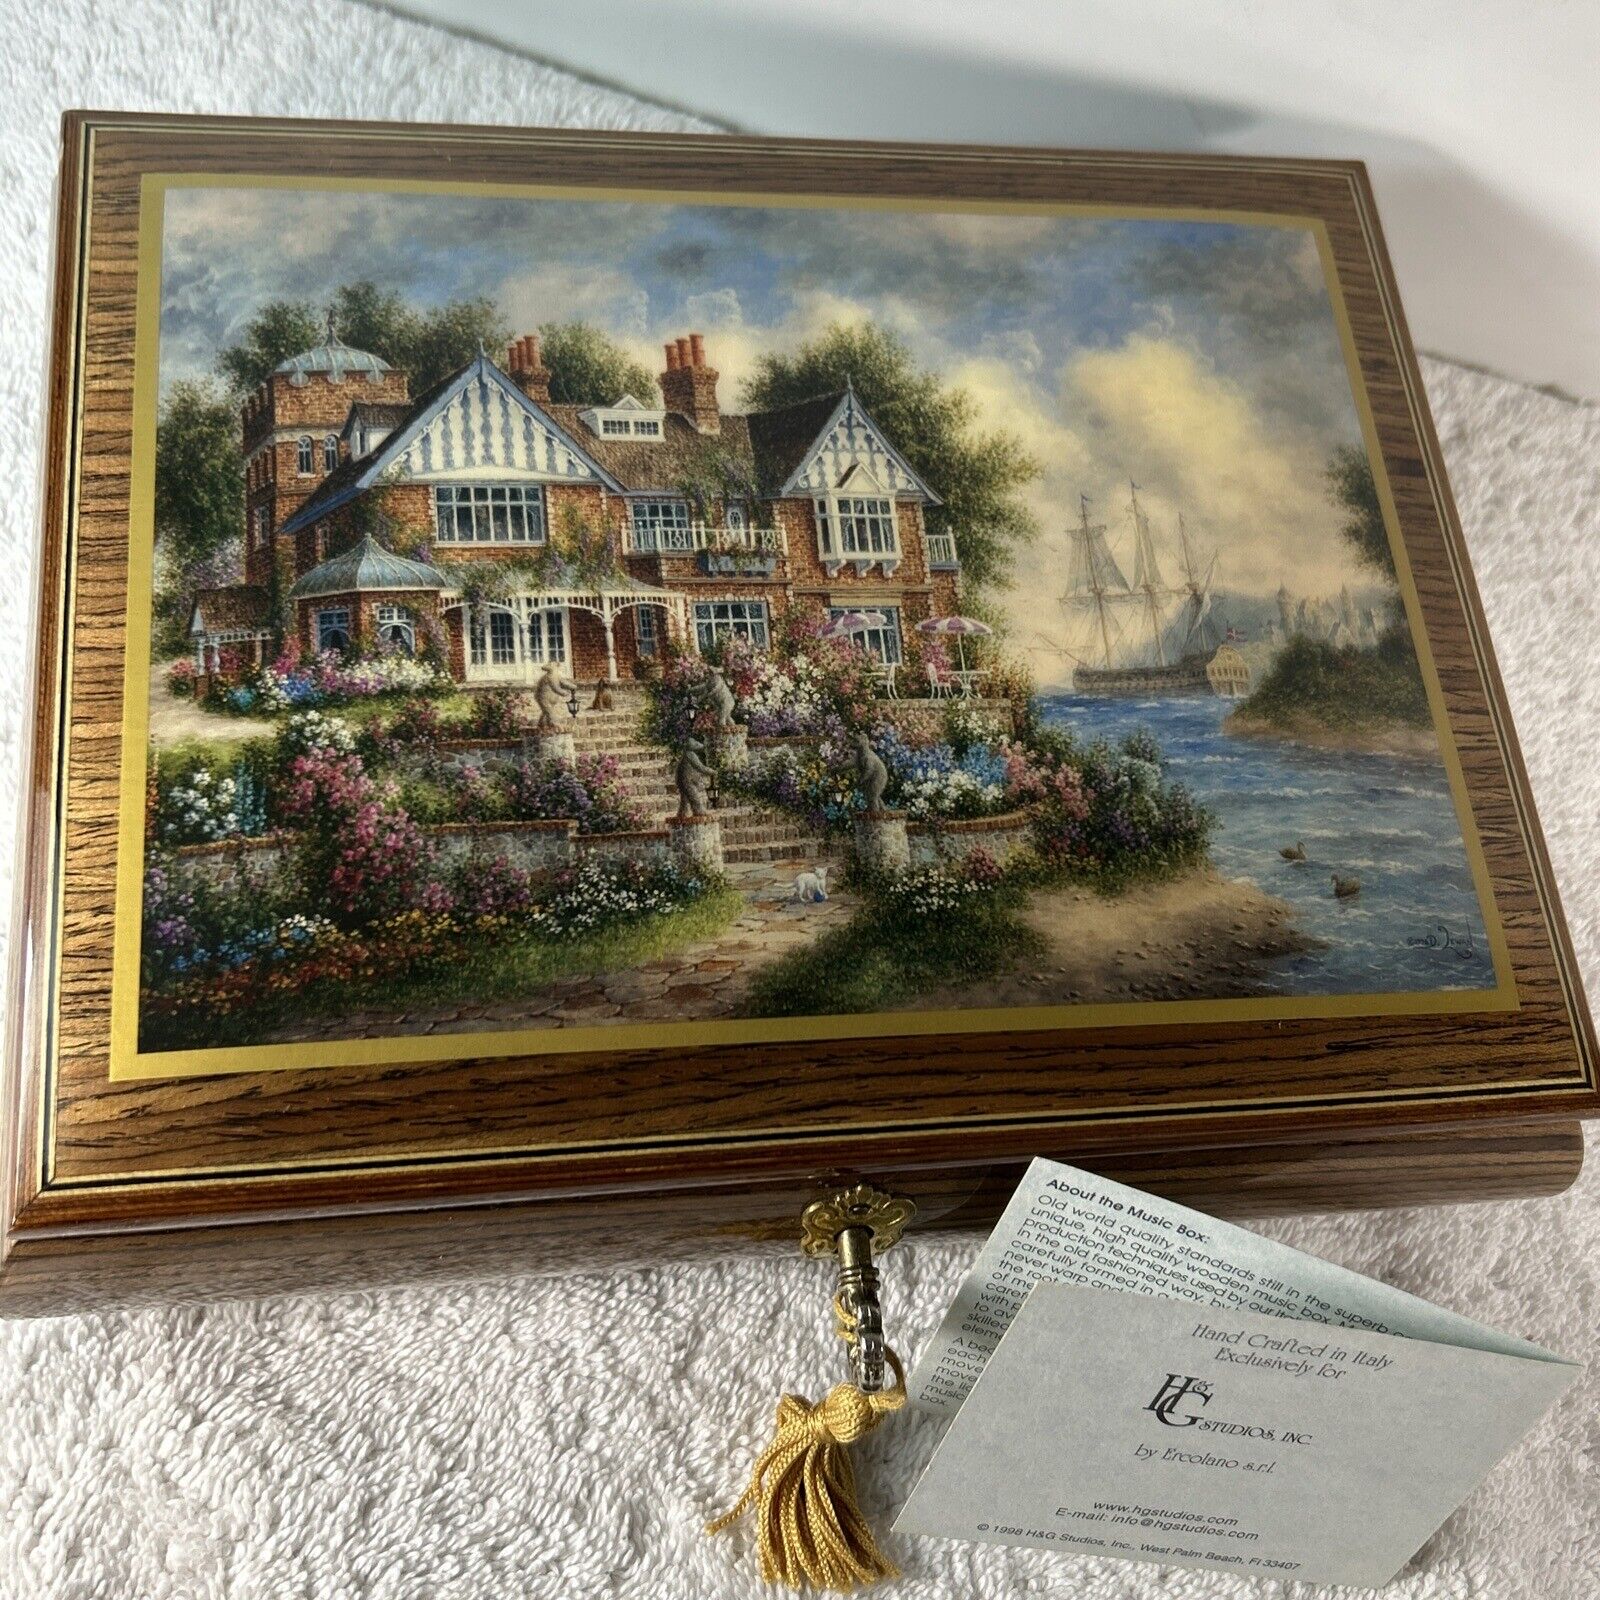 Inlayed Wood Works Art Decor Fine Music Box, Made In Italy, Art By Dennis Lewan